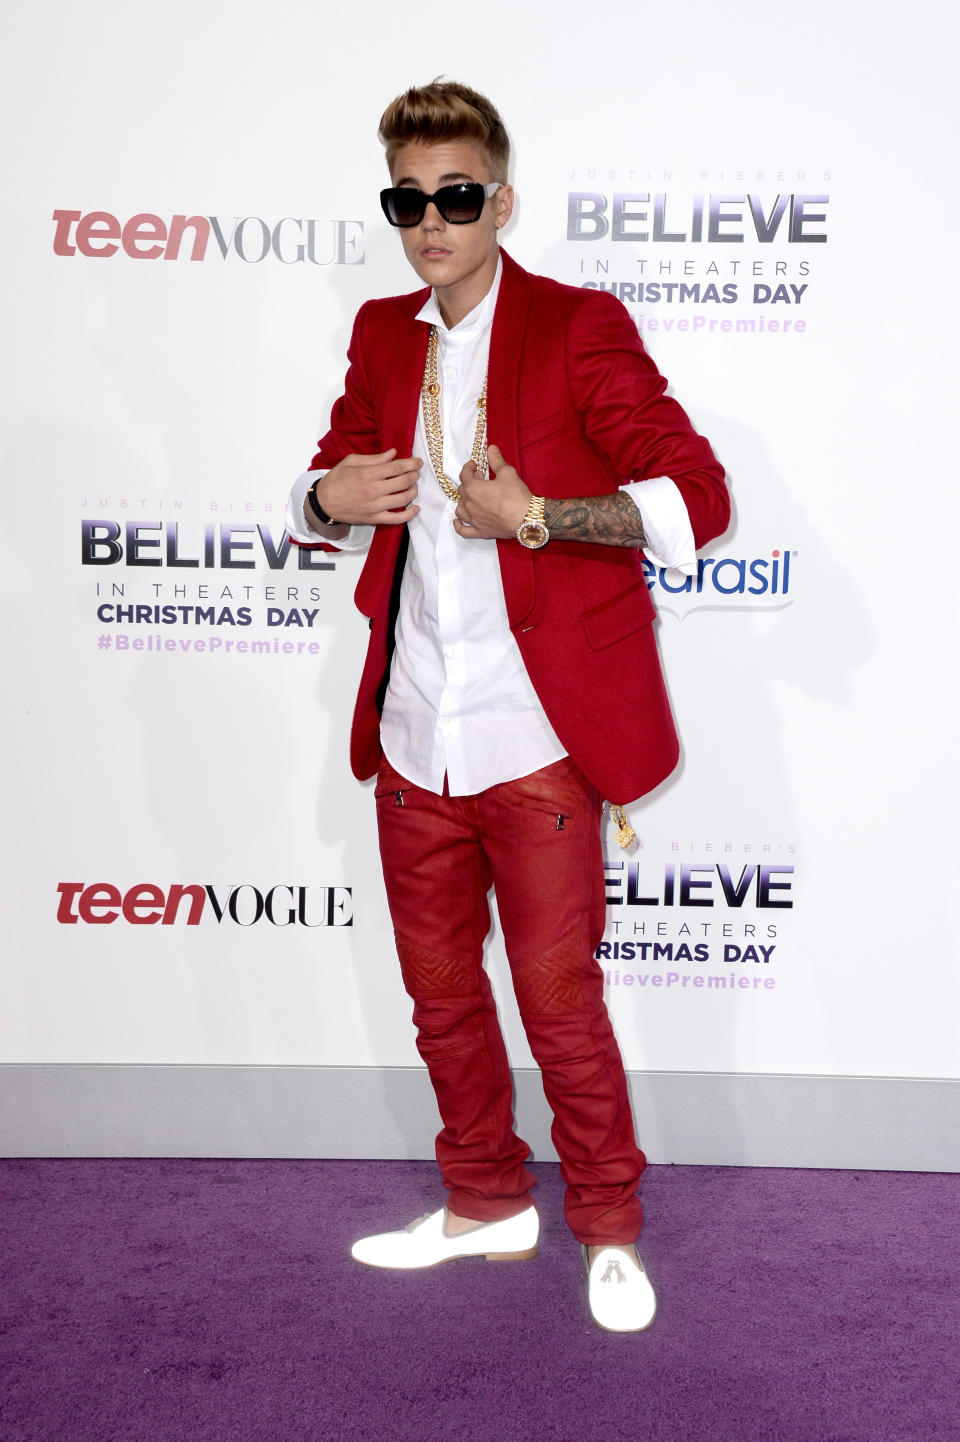 Arrives at the premiere of Open Road Films' "Justin Bieber's Believe" at Regal Cinemas L.A. Live on December 18, 2013 in Los Angeles, California.